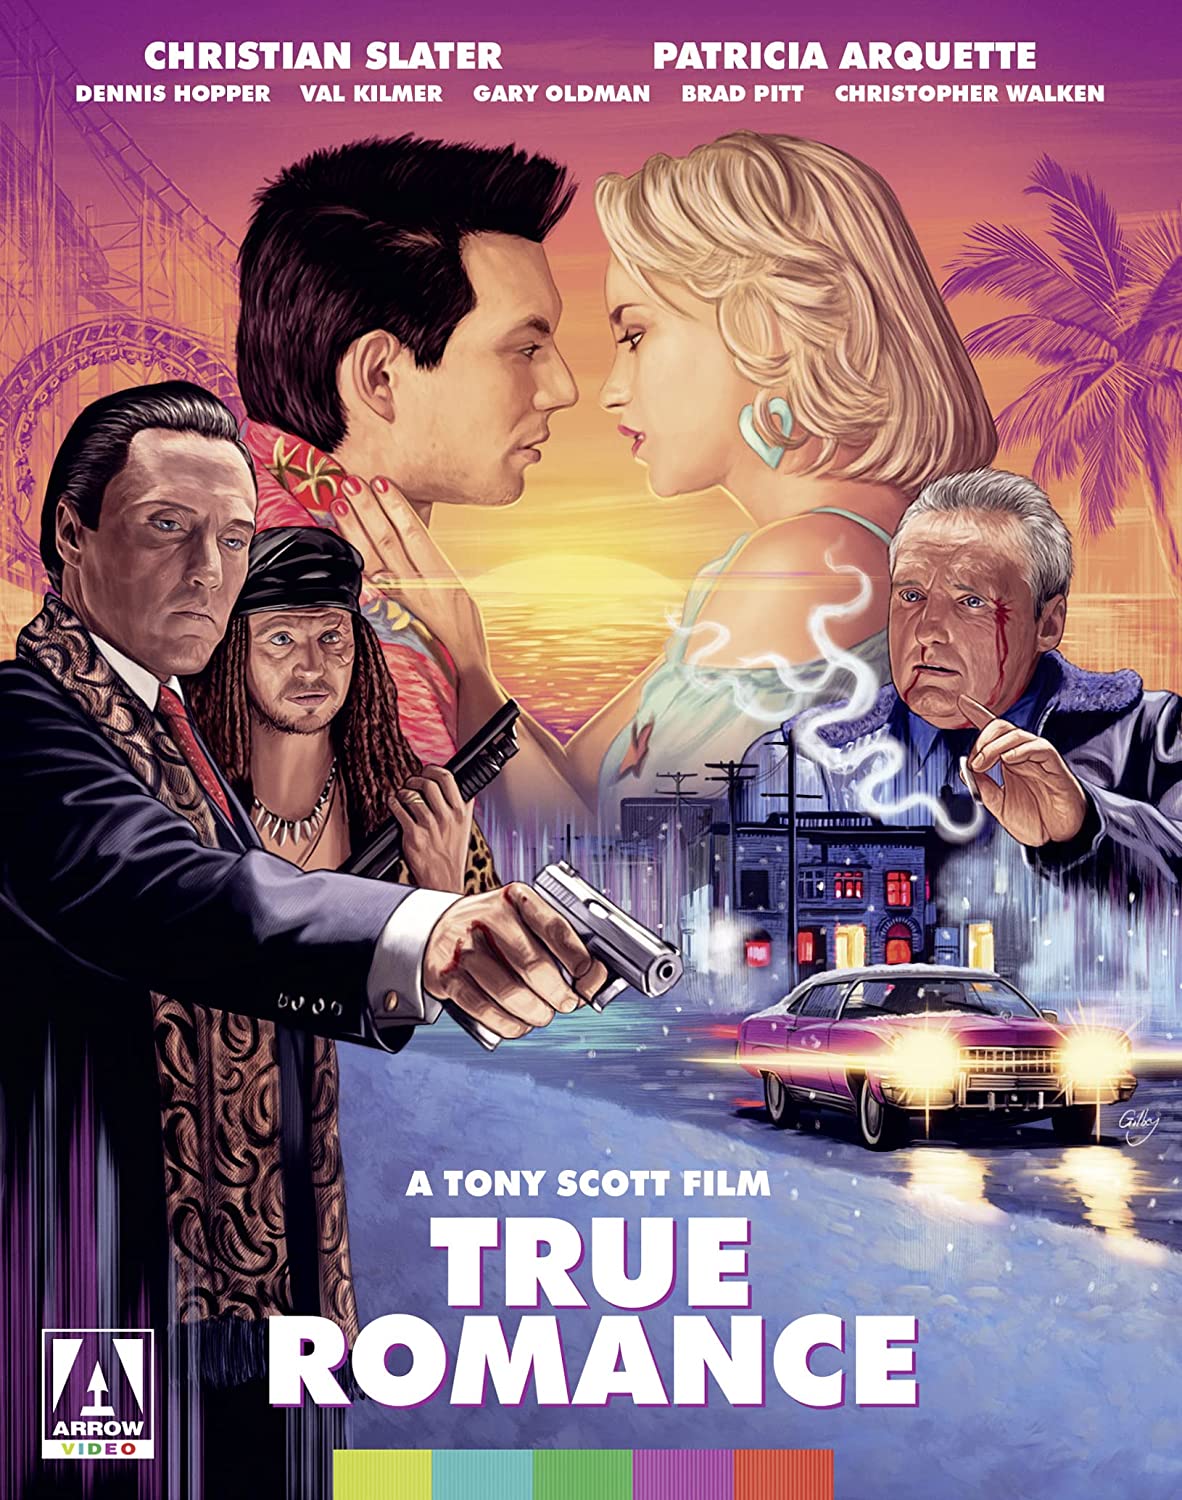 True Romance (2-Disc Deluxe Limited Edition Steelbook) [4K Ultra HD + Blu-ray] - $34.99 at Amazon